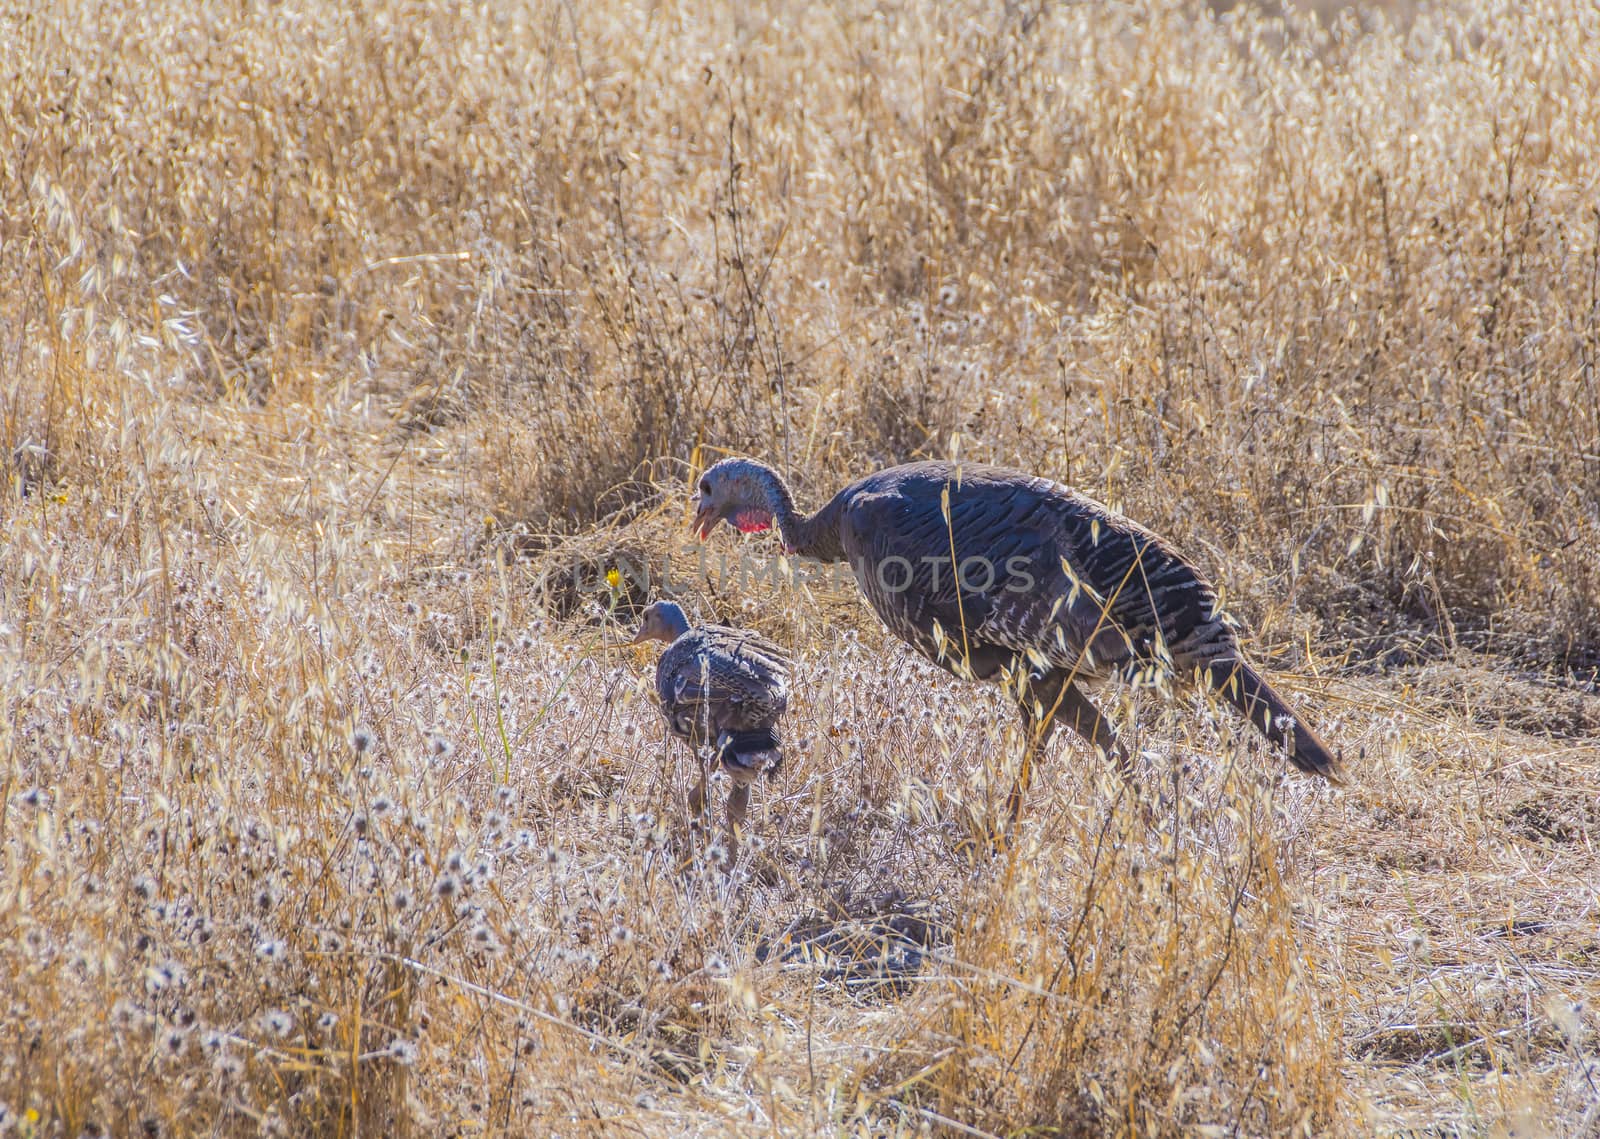 Wild Turkey hen with one chick in the dry grass field looking for food.